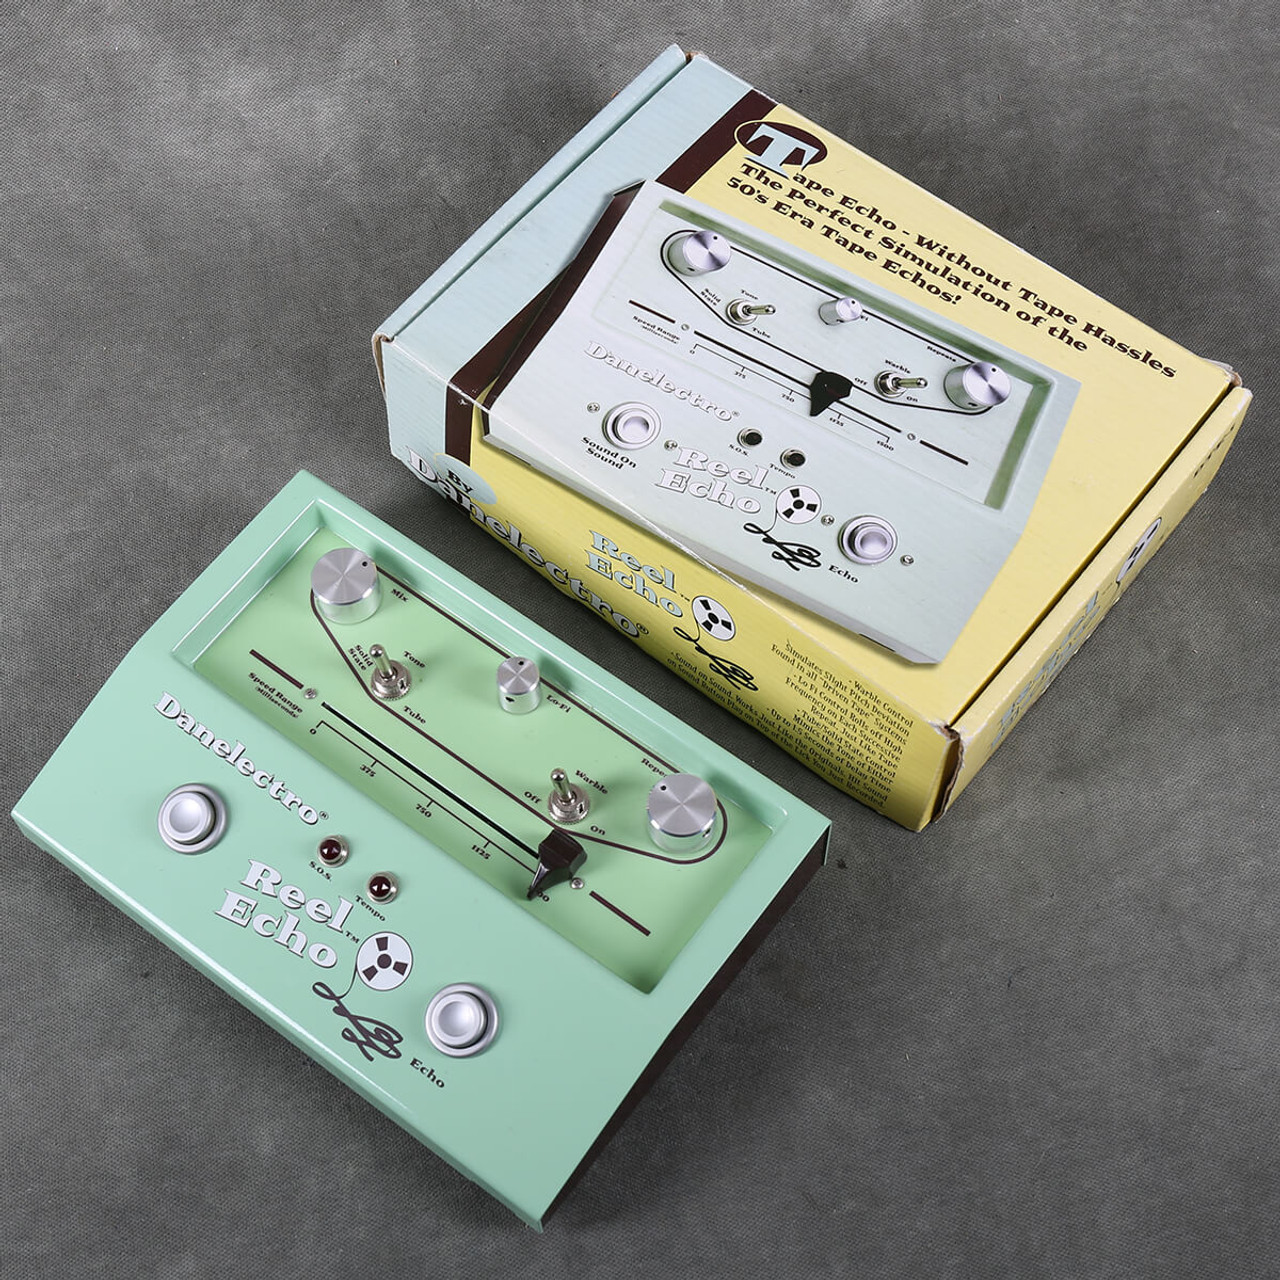 Danelectro DTE-1 Reel Echo Tape Simulator FX Pedal w/Box - 2nd Hand